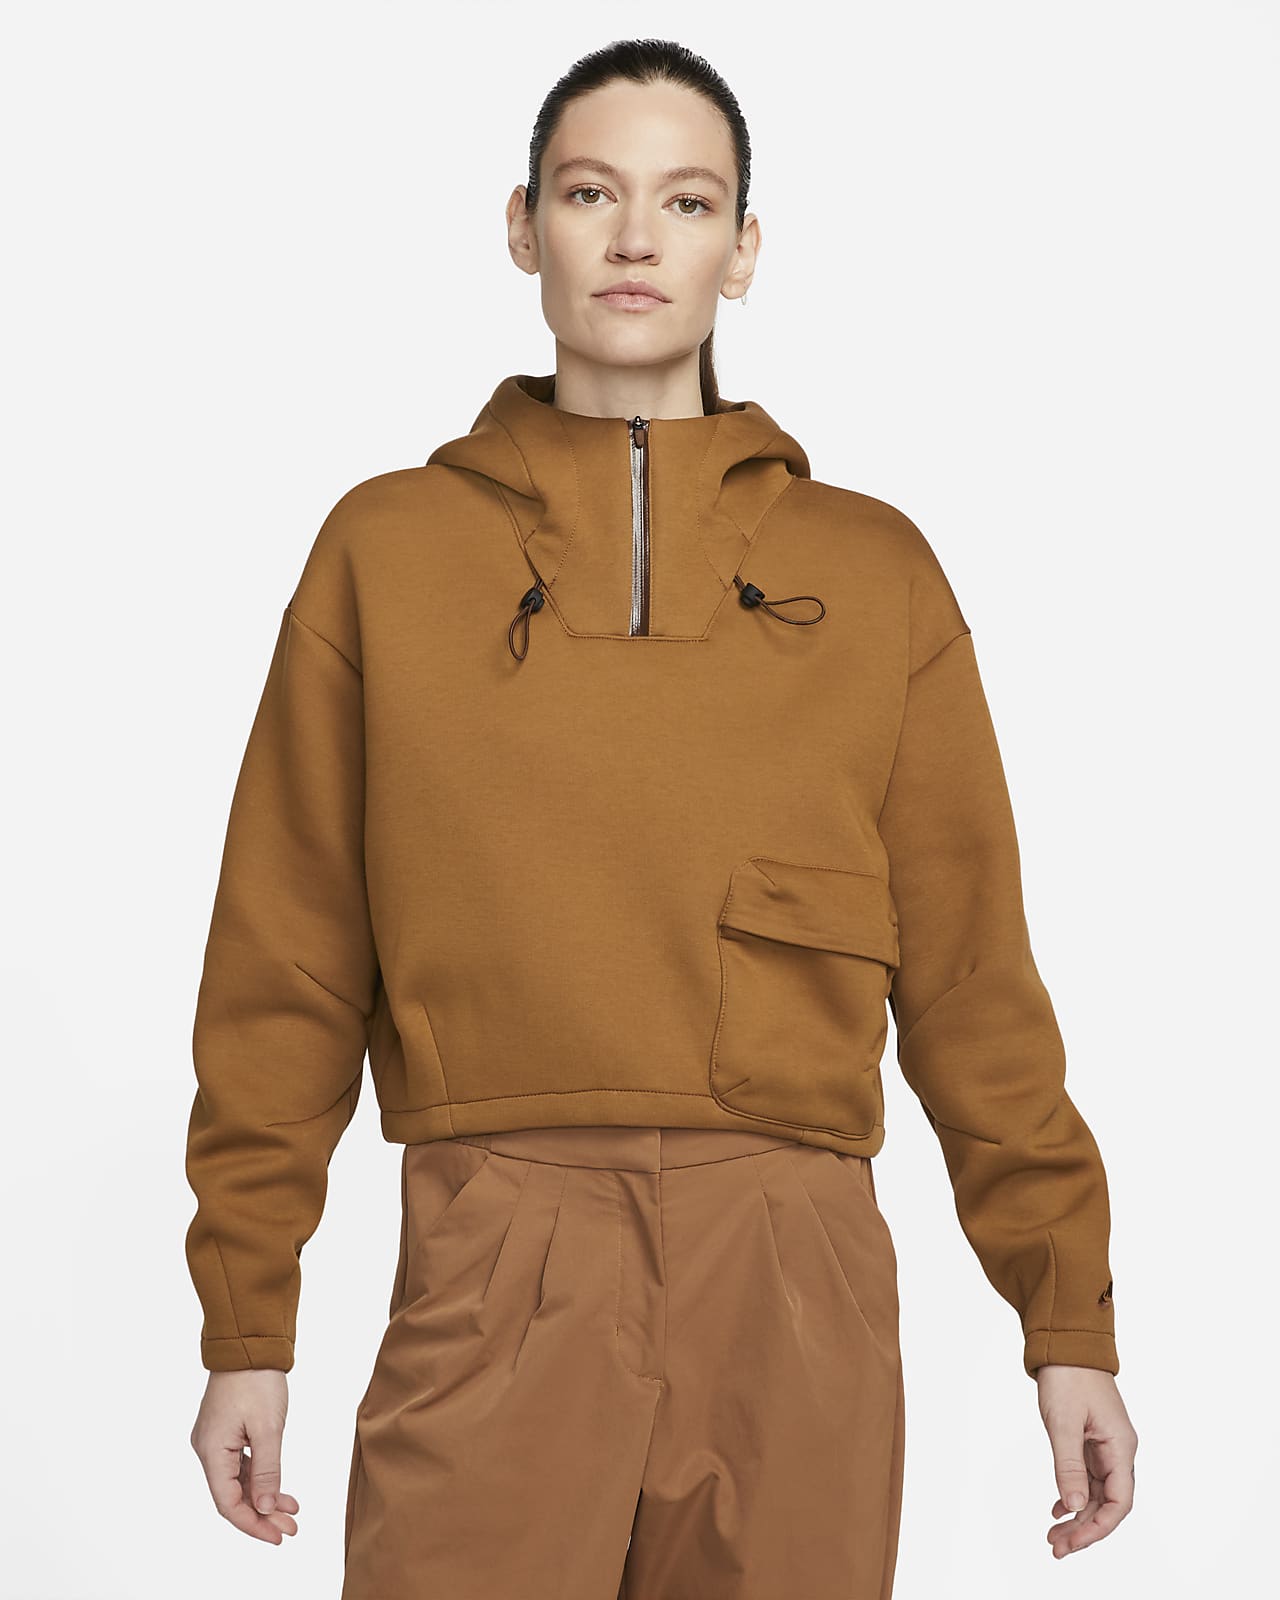 Hoodie pullover Nike Sportswear Therma-FIT ADV Tech Pack para mulher